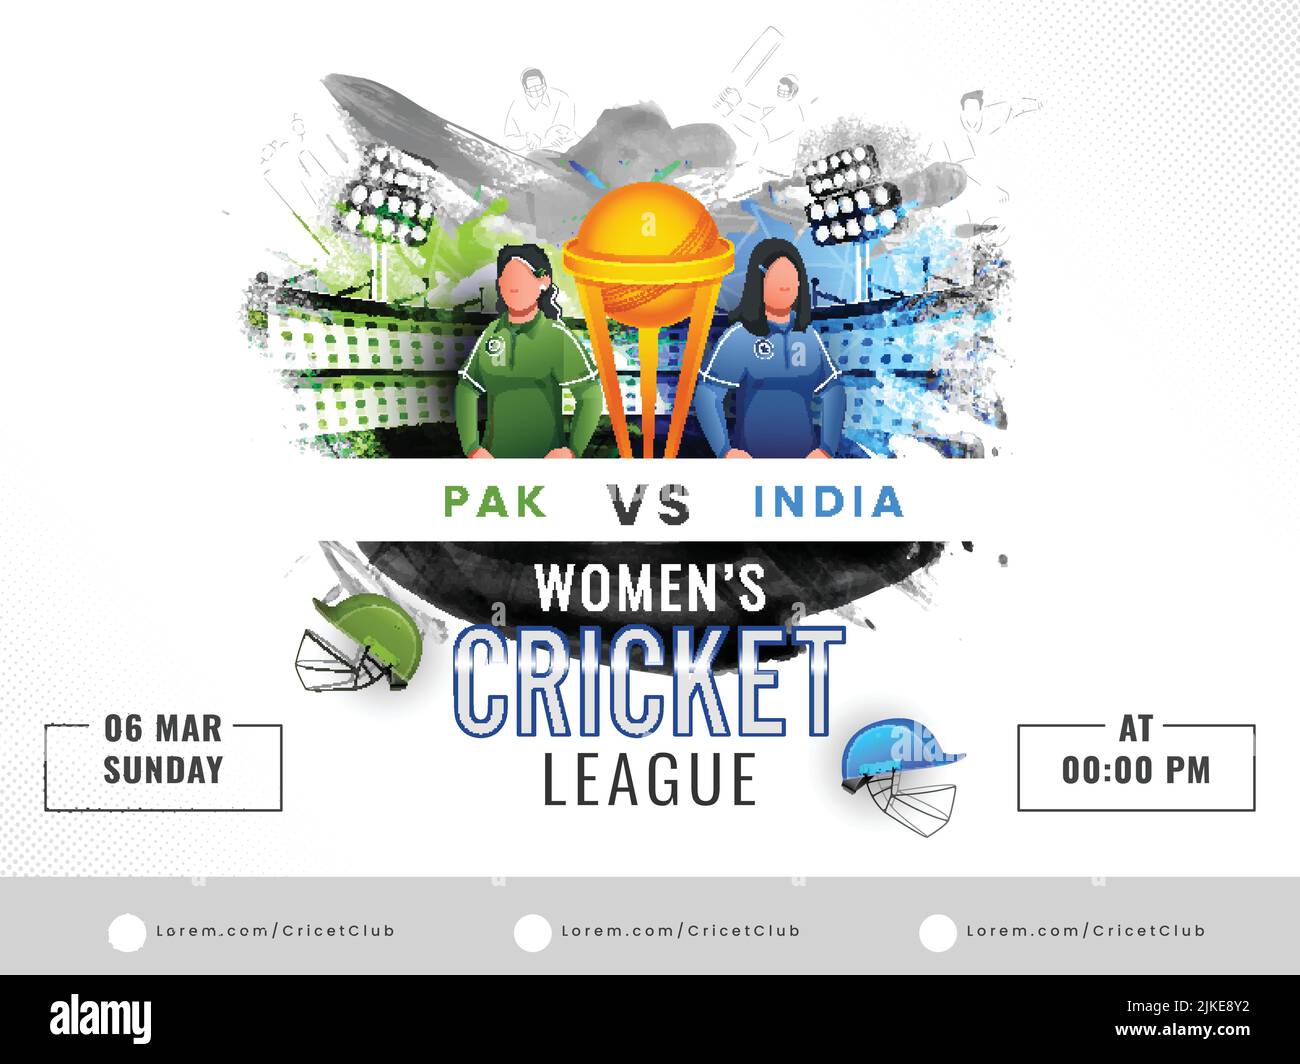 Women's Cricket Match Between Pakistan VS India With Faceless Cricketer Players And Winning Trophy Cup On Grunge Brush Stadium Background. Stock Vector